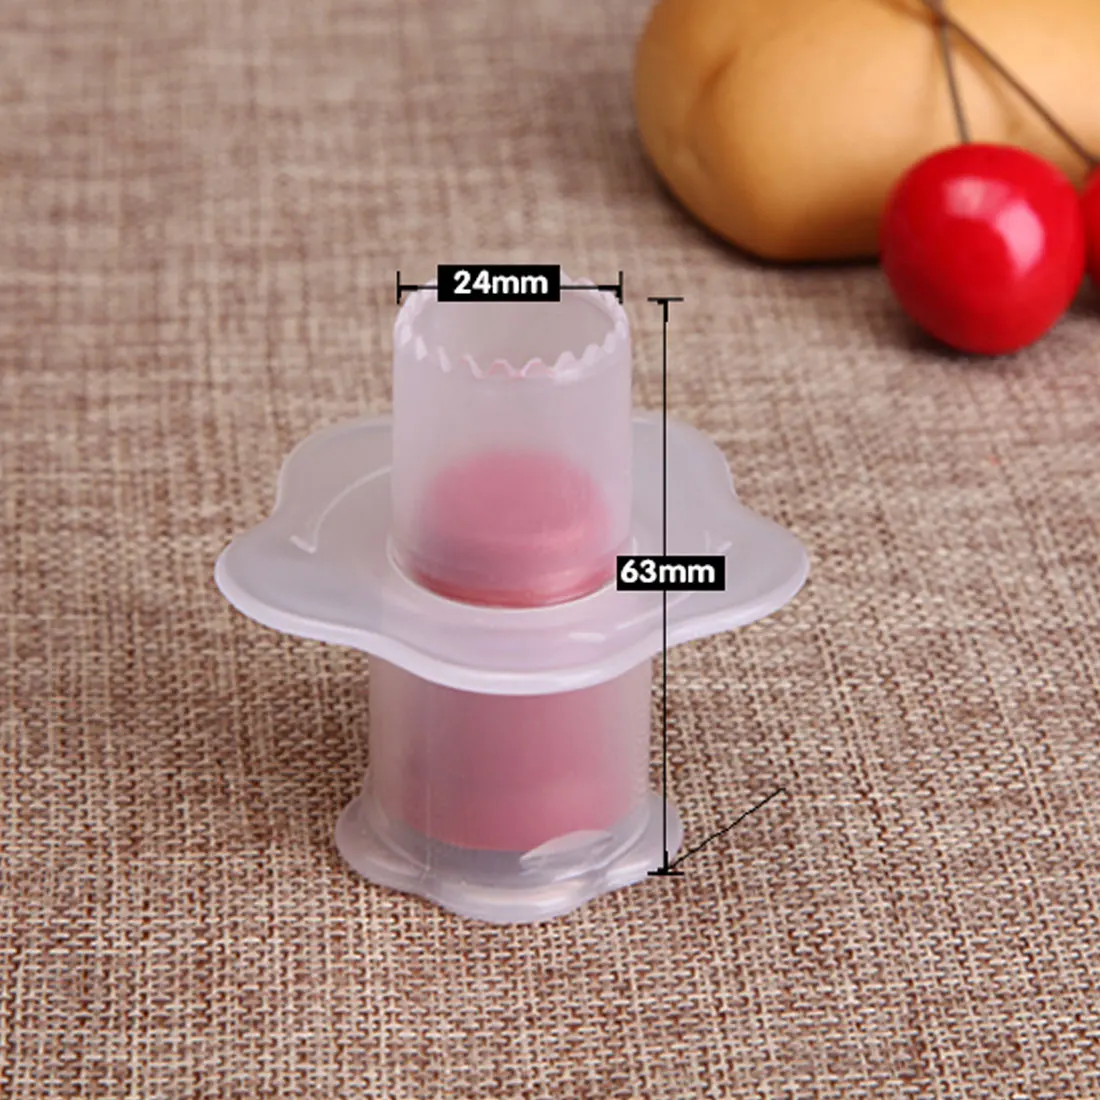 

Cake Mold Plastic Bakeware Pastry Mini Mold Cupcake Corer Plunger Circle Cutter Core Remover Muffin Cake Decorating Tools Bakin